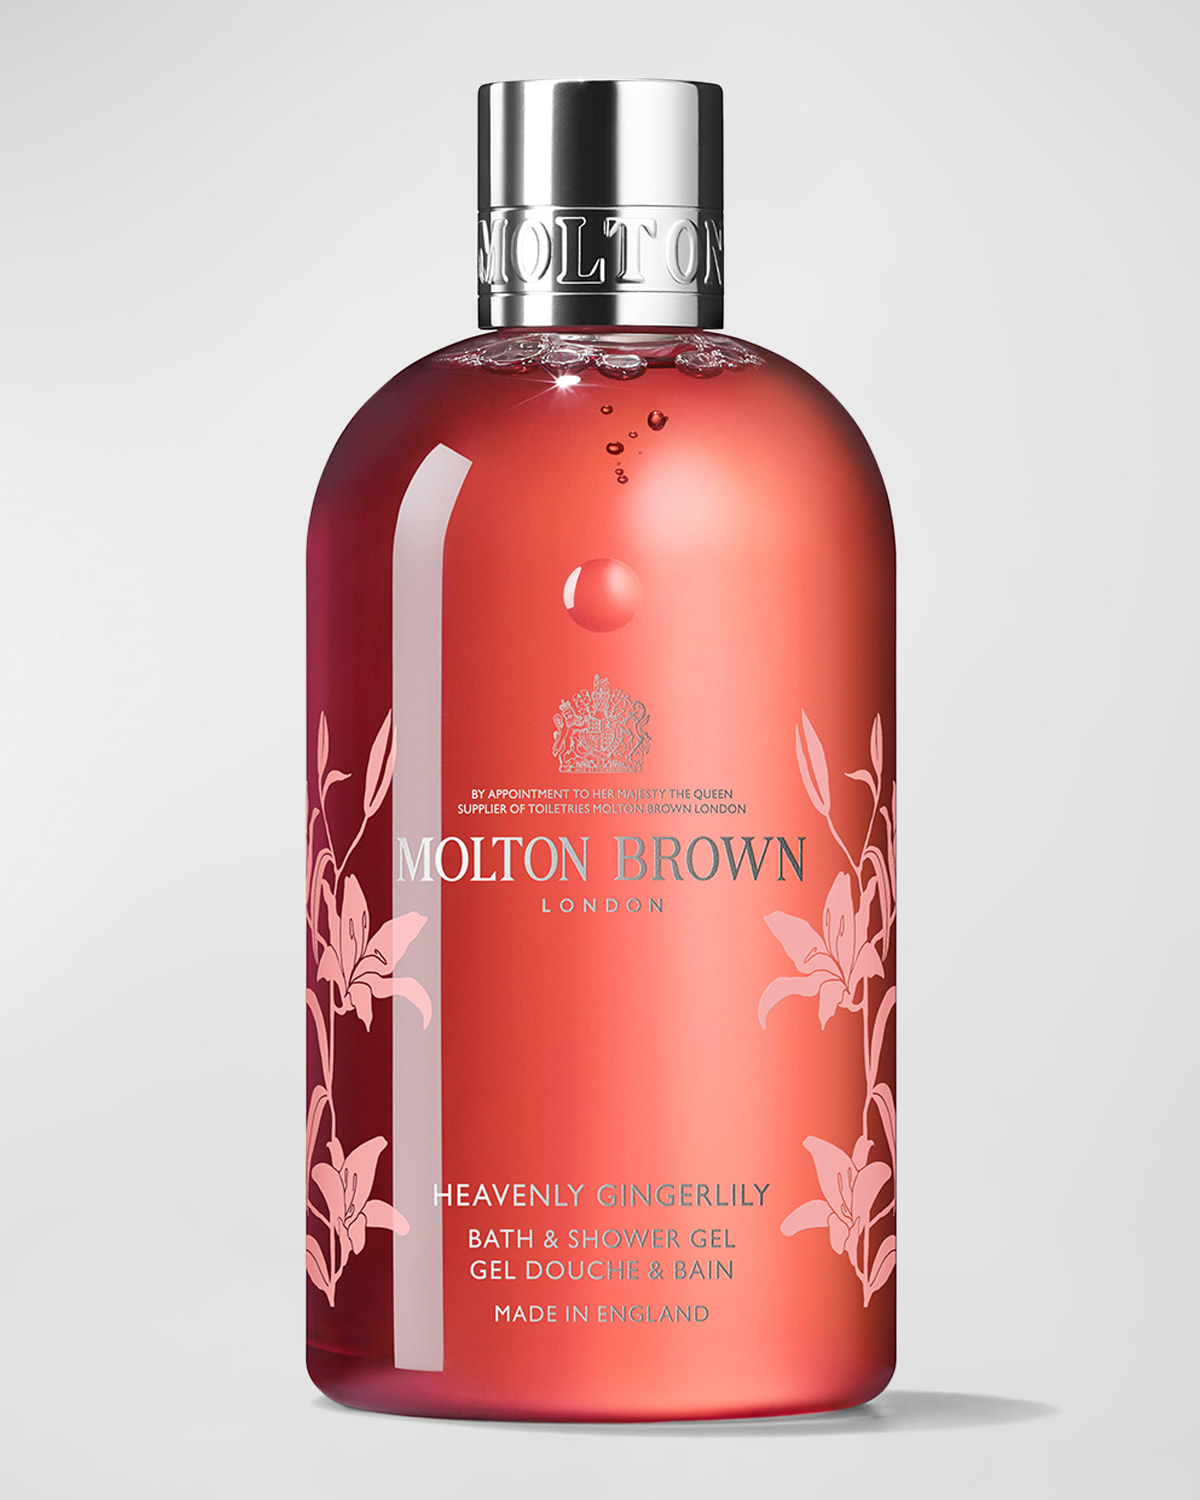 Heavenly Gingerlily Bath and Shower Gel, 10 oz. - Limited Mother's Day Edition